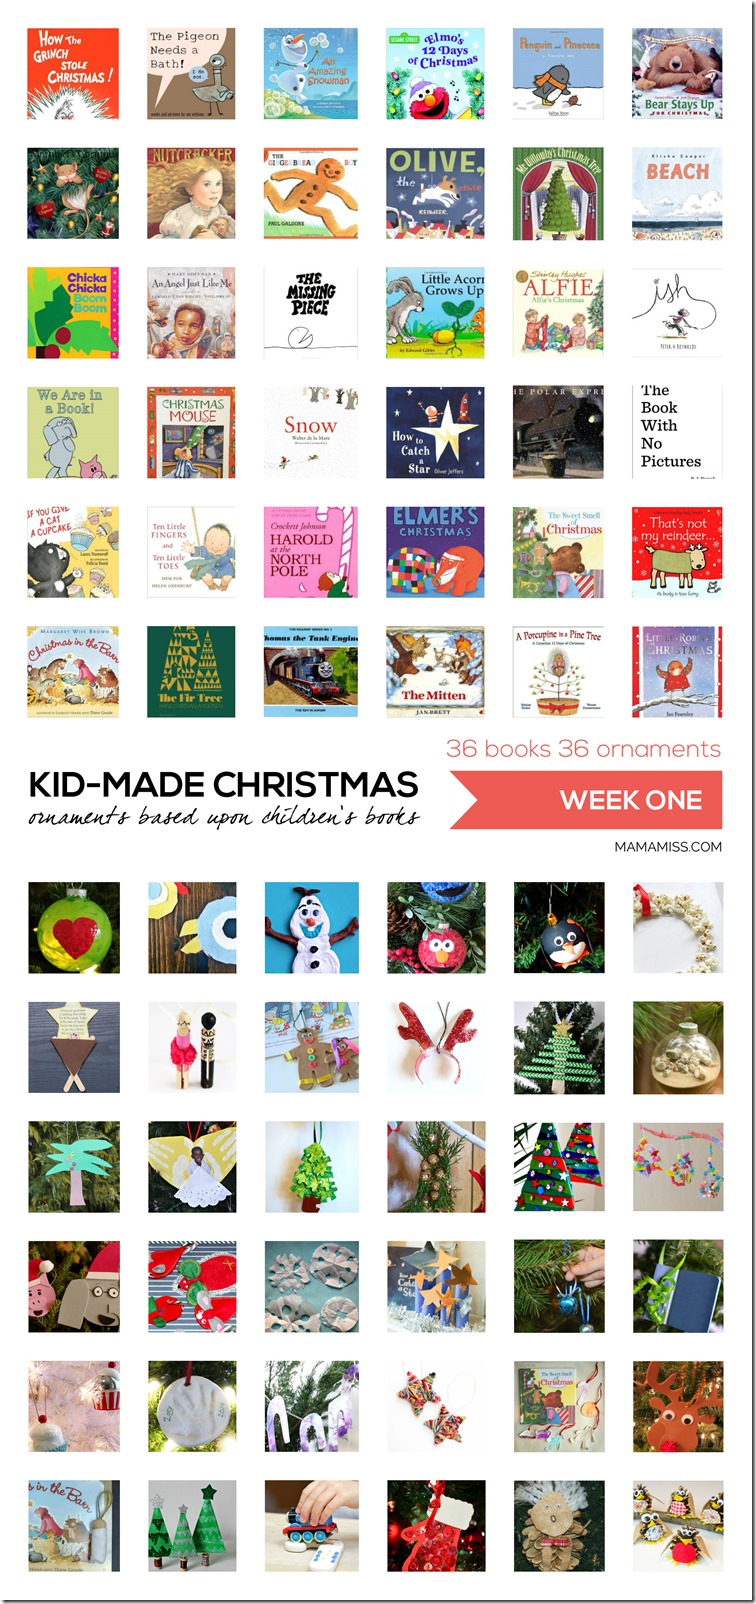 10 Days of a Kid-Made Christmas - featuring 70+ ornaments inspired by childrens books! | @mamamissblog #KidMadeChristmas #KidMadeOrnaments